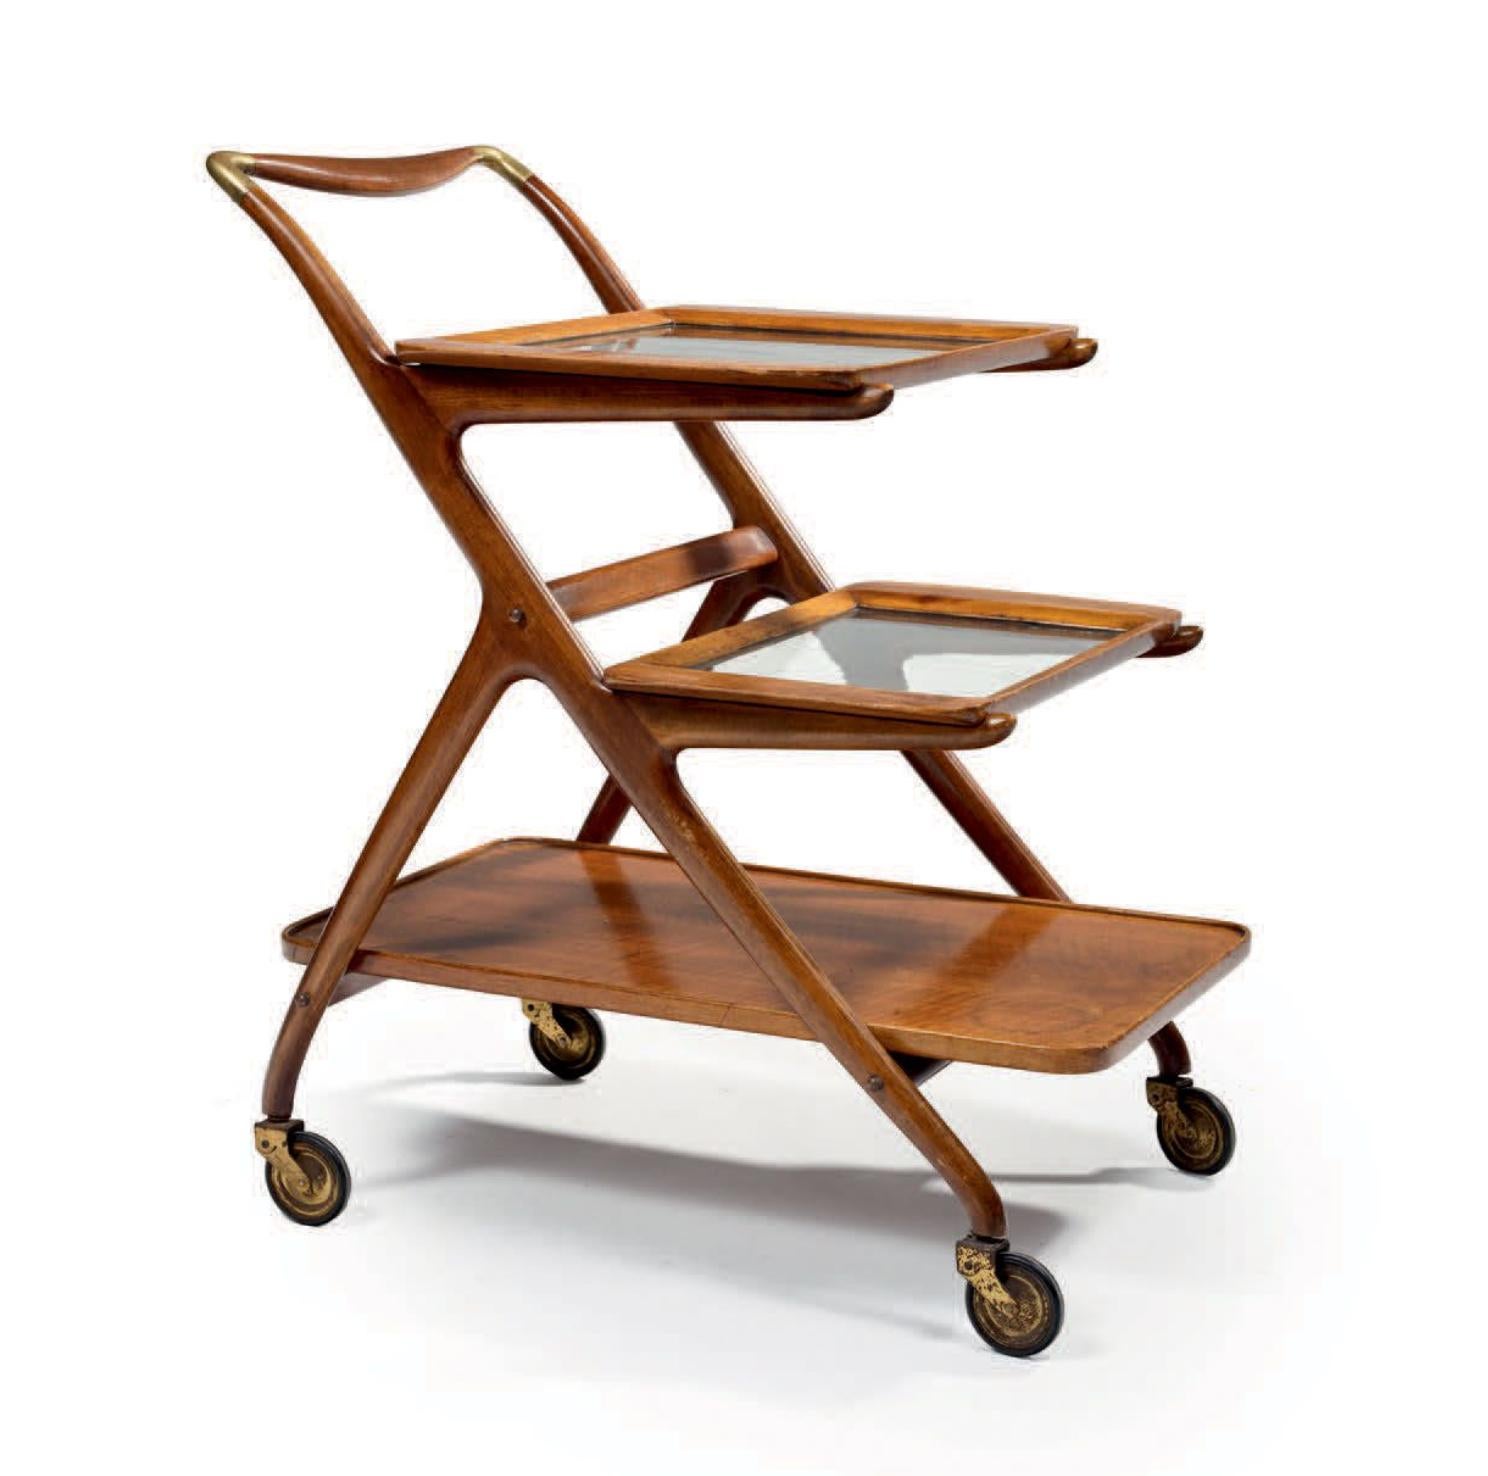 Rare early 50s mahogany trolley designed by Ico Parisi.
It is on three levels two of them with glass and there are small brass fine details on the corners.
The structure is made of polished mahogany with rounded and beveled corners bent wood